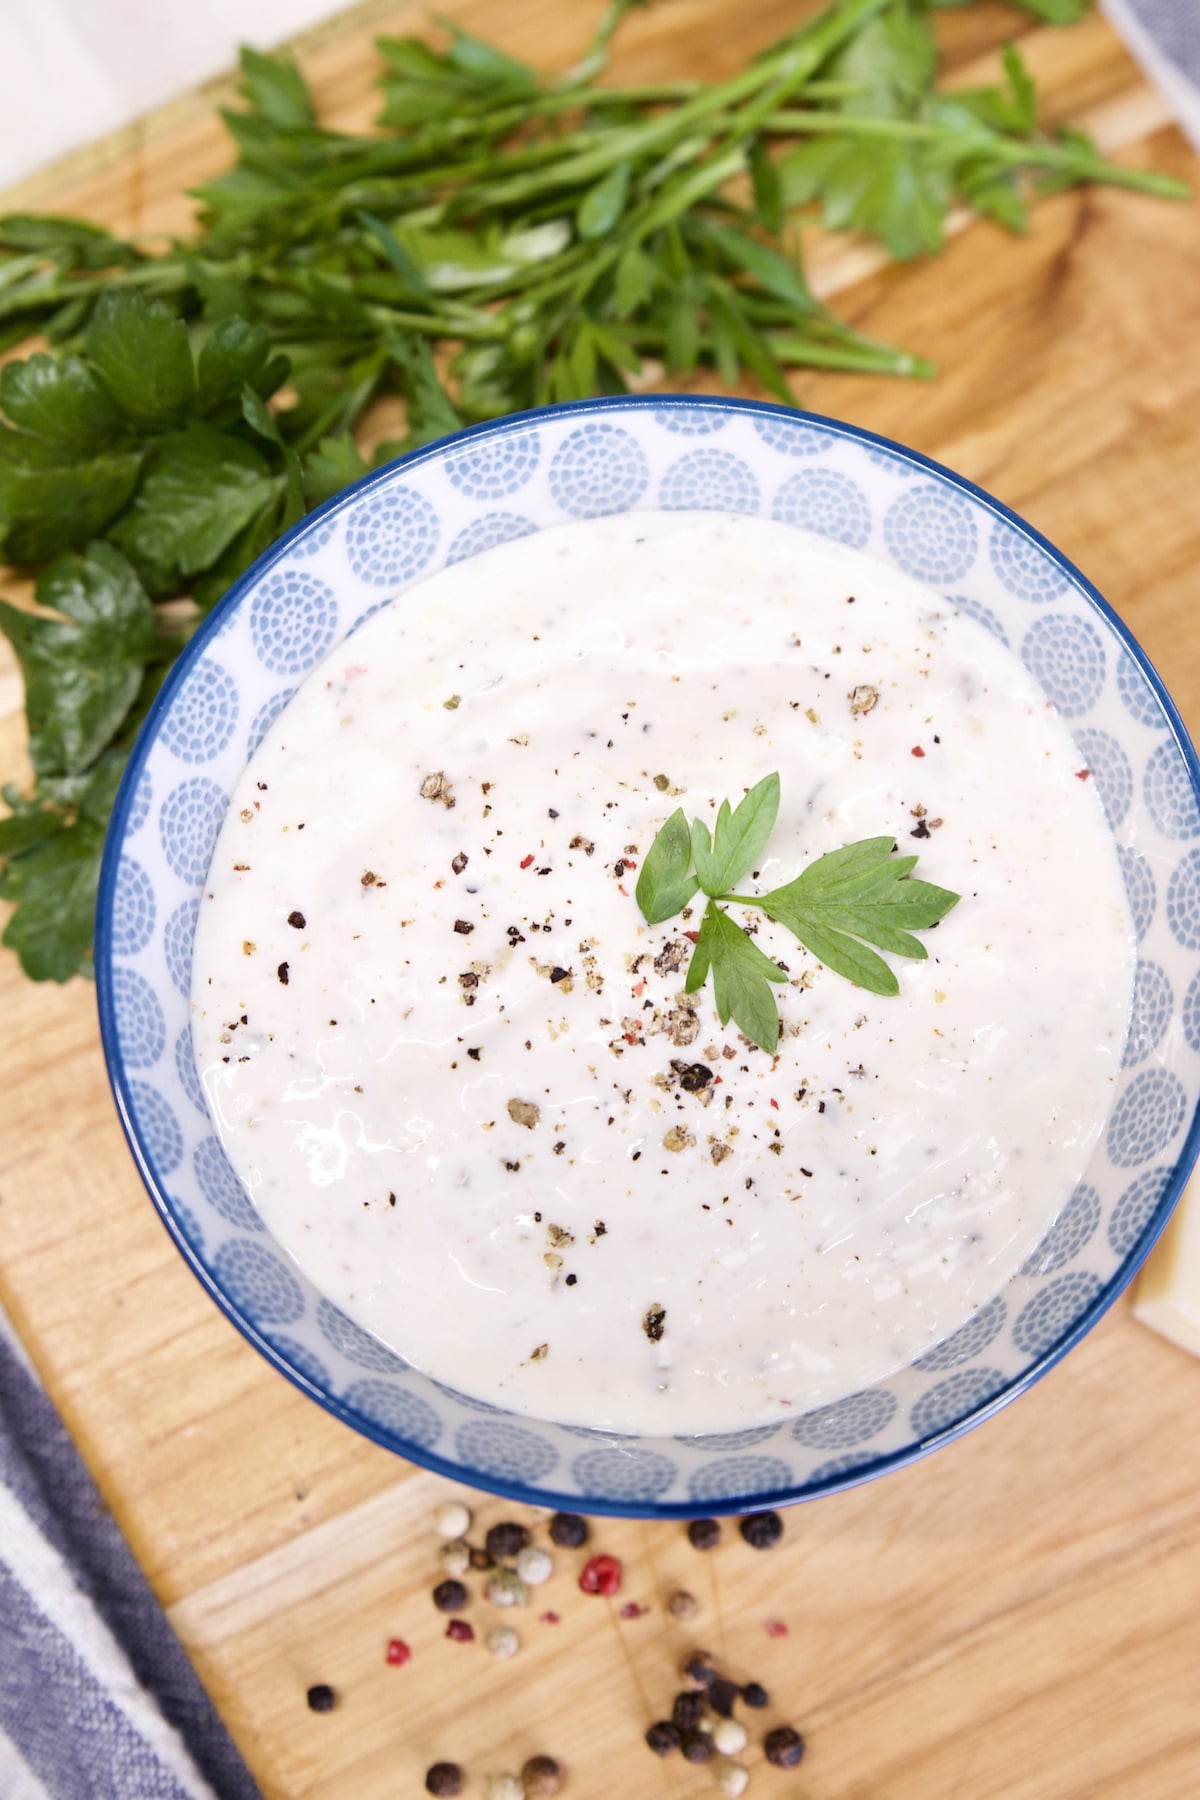 Bowl of ranch dip with parsley.